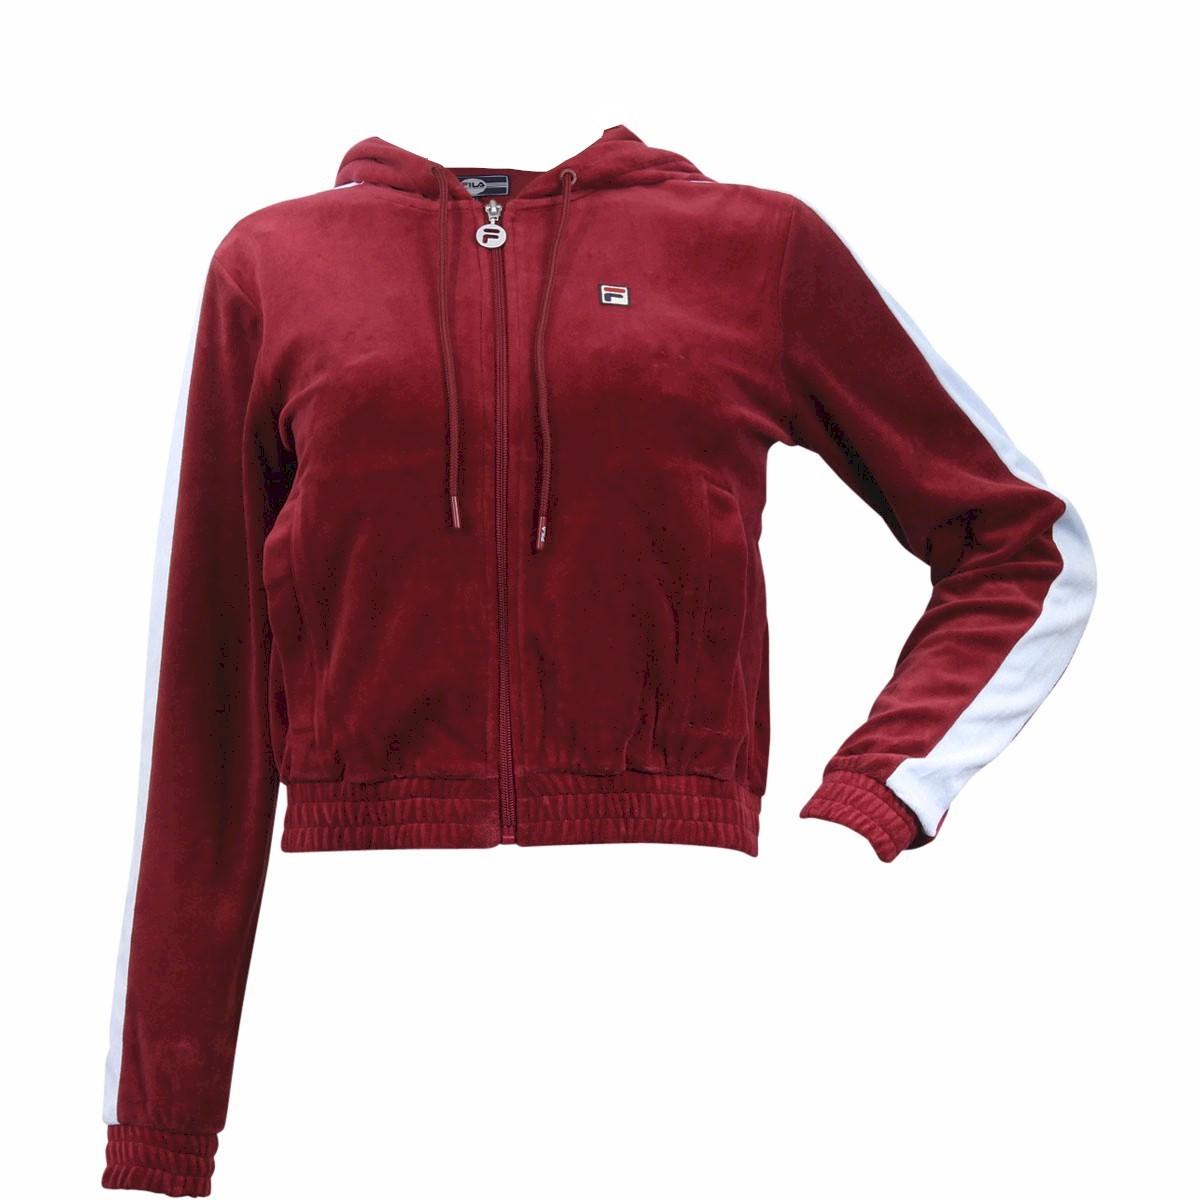 Fila Women's Carly Long Sleeve Hooded Velour Jacket - Rio Red/Skyway - X Small